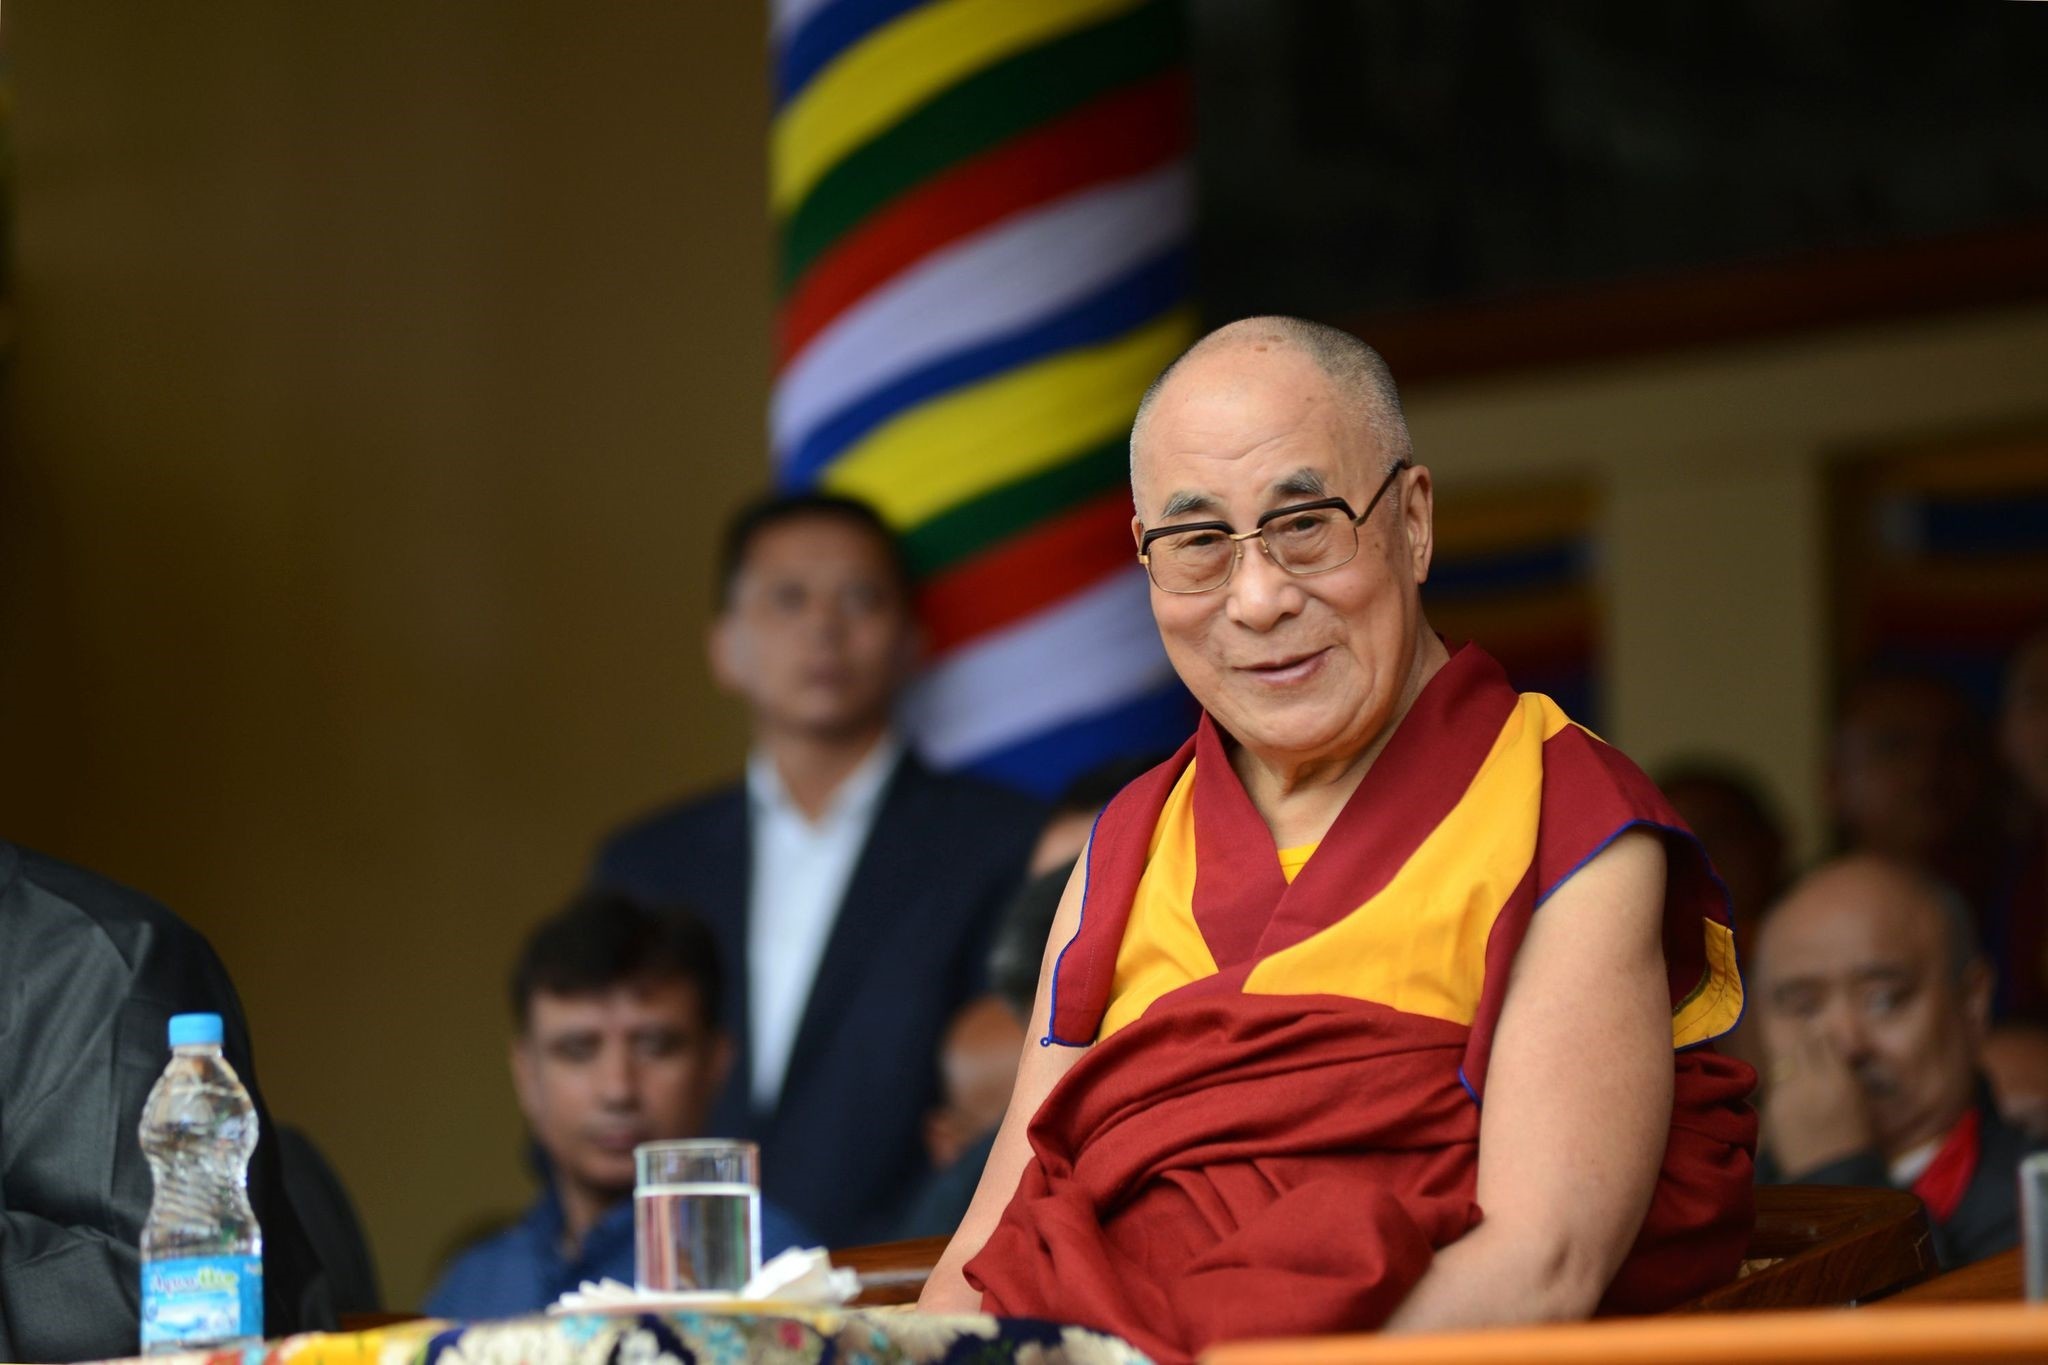  Dalai Lama attending an event to celebrate President Barack Obama will meet the Dalai Lama at the White House on June 15, 2016 (AFP PHOTO)